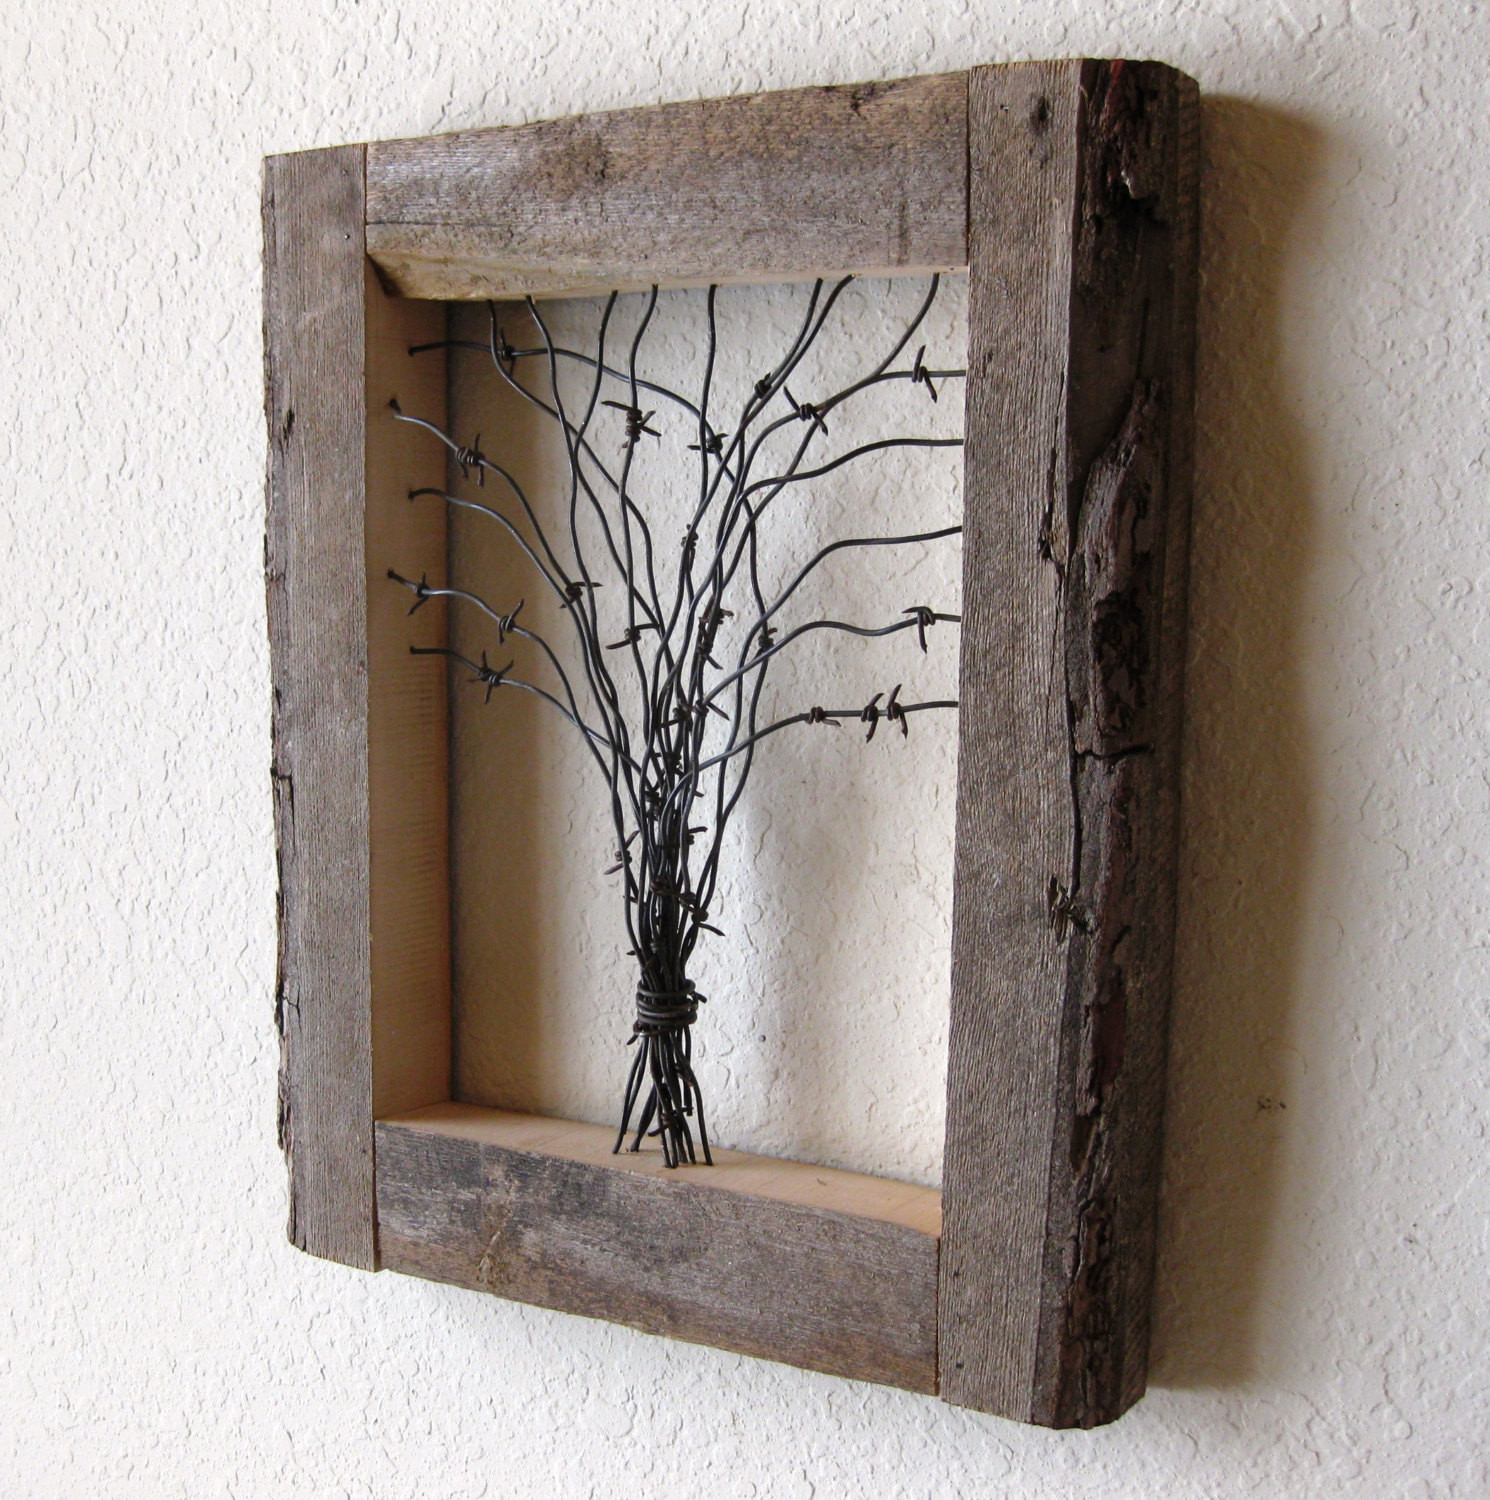 Barnwood Craft Ideas Unique Reclaimed Barn Wood And Barbed Wire Tree Wall Art Of Barnwood Craft Ideas 